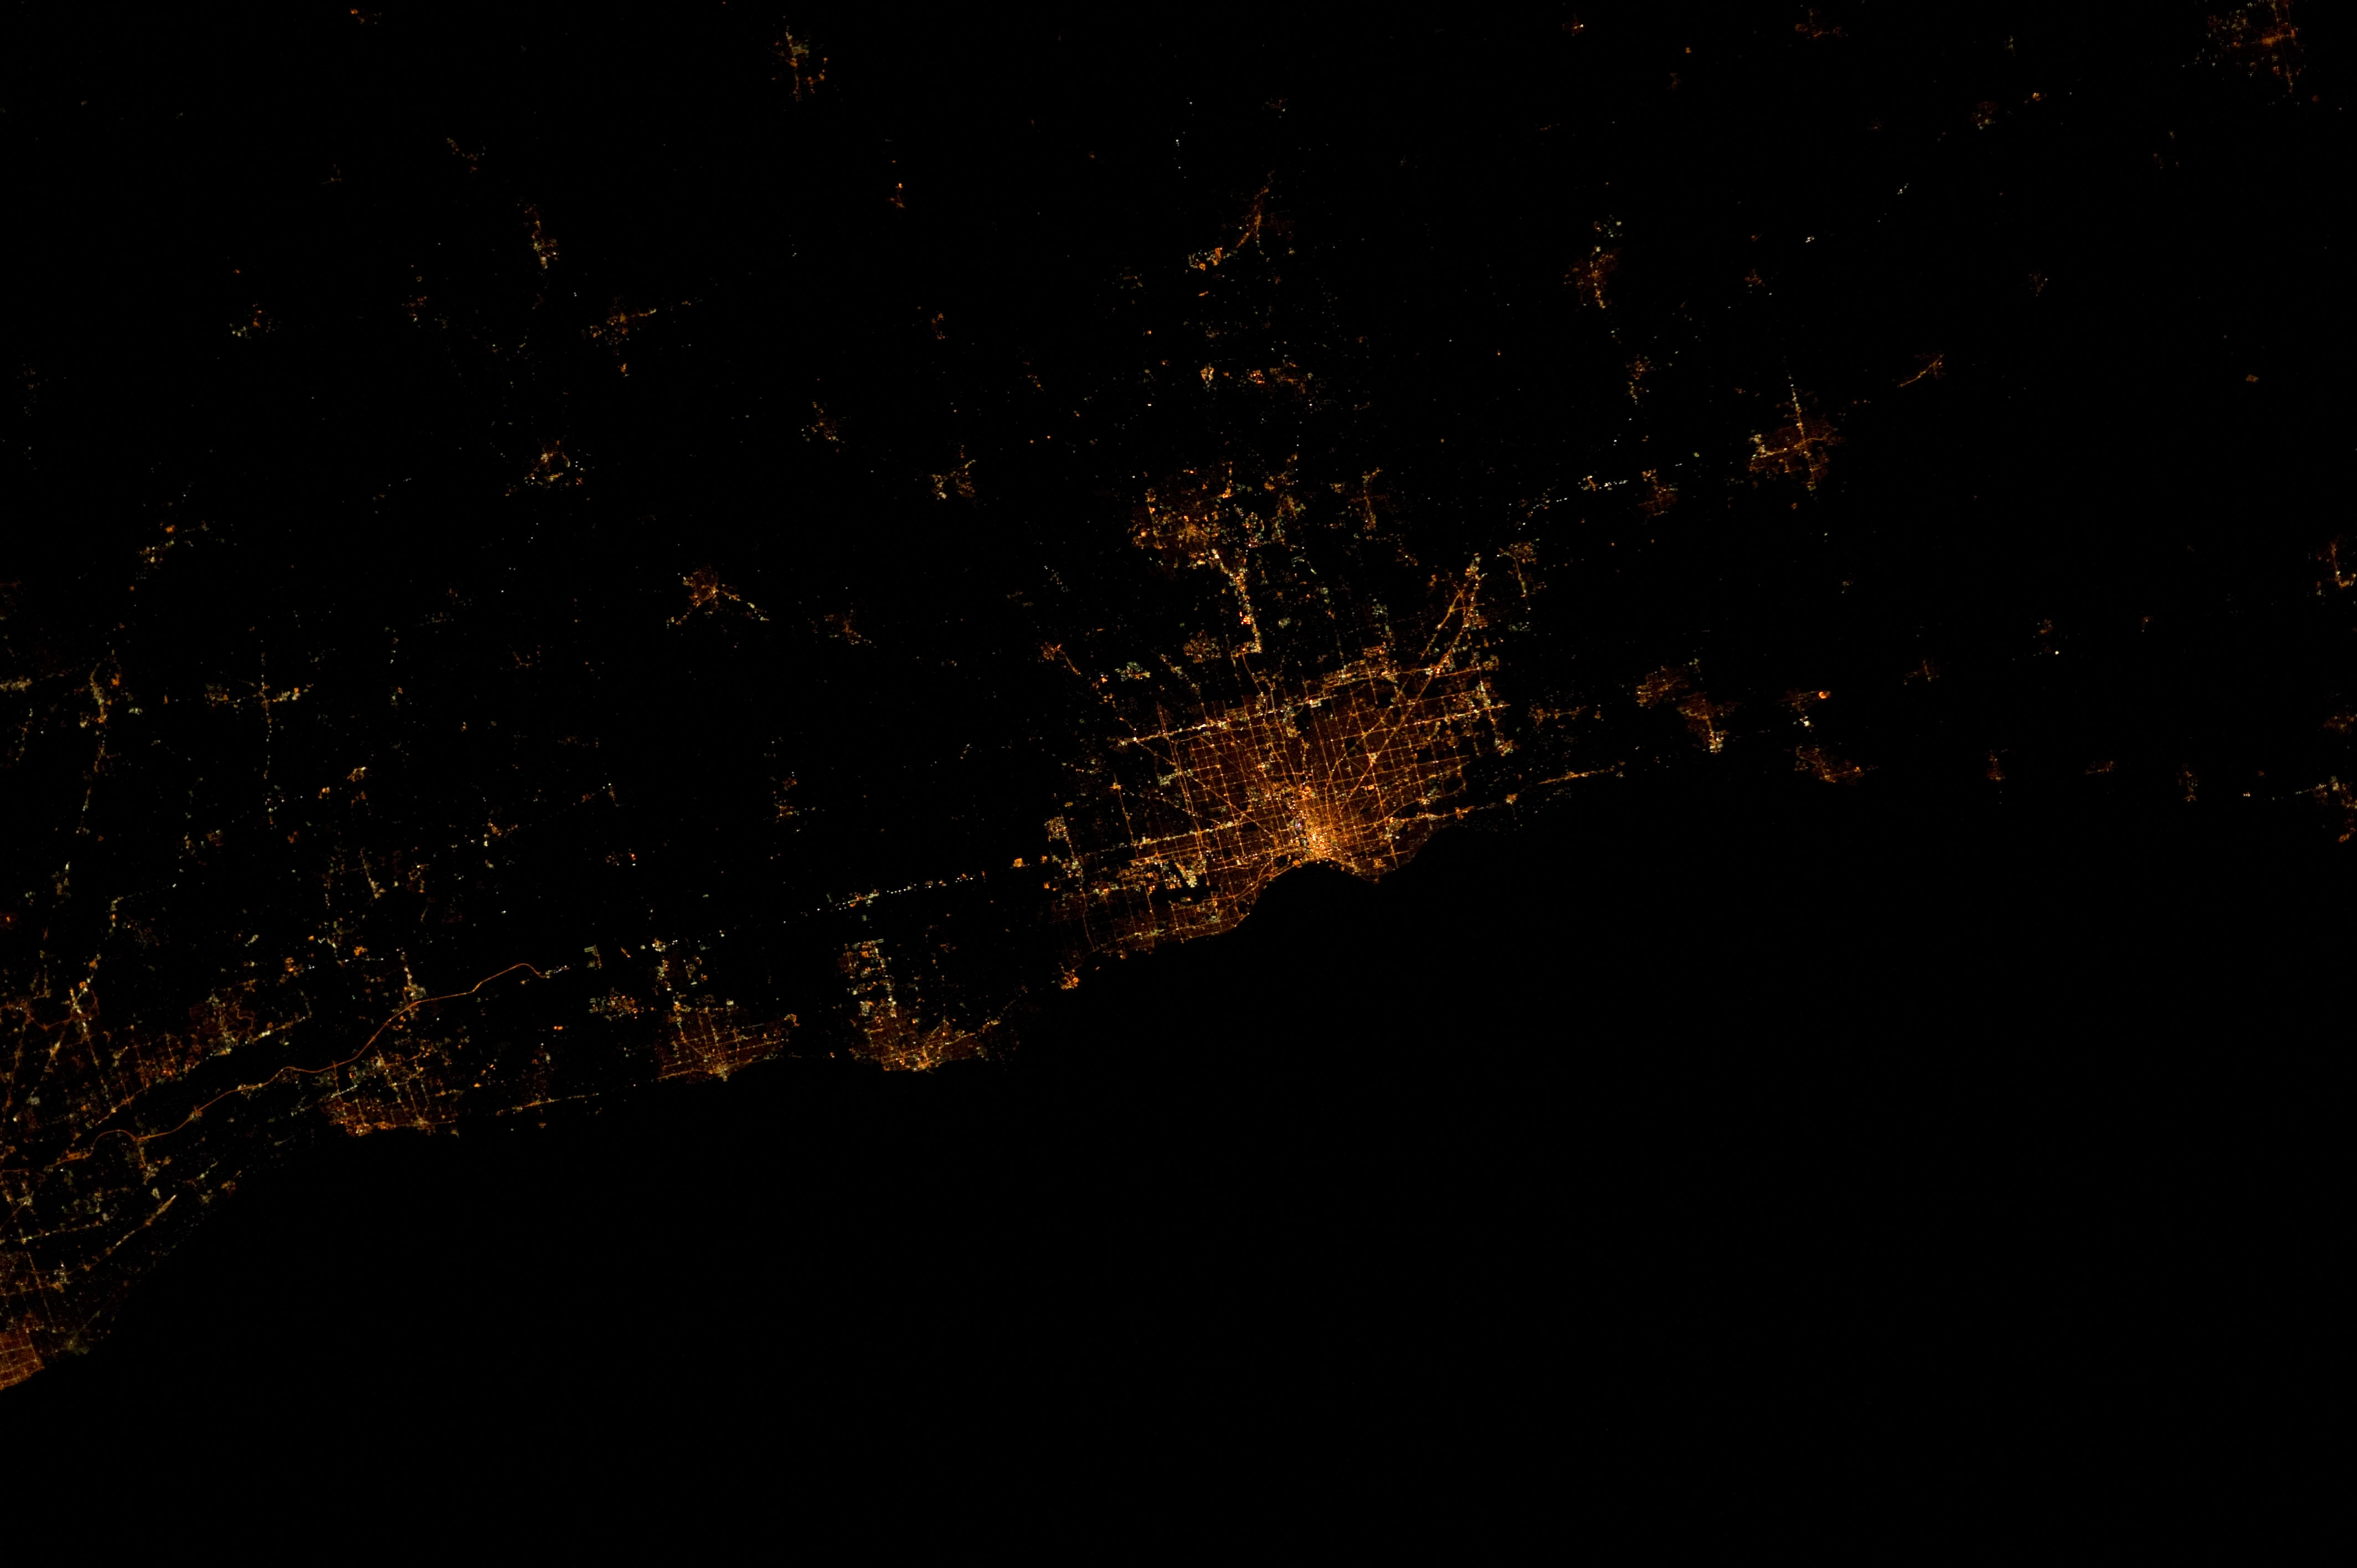 Burlington, 11:23:40 PM CDT in 2012 during Expedition 30 at the International Space Station